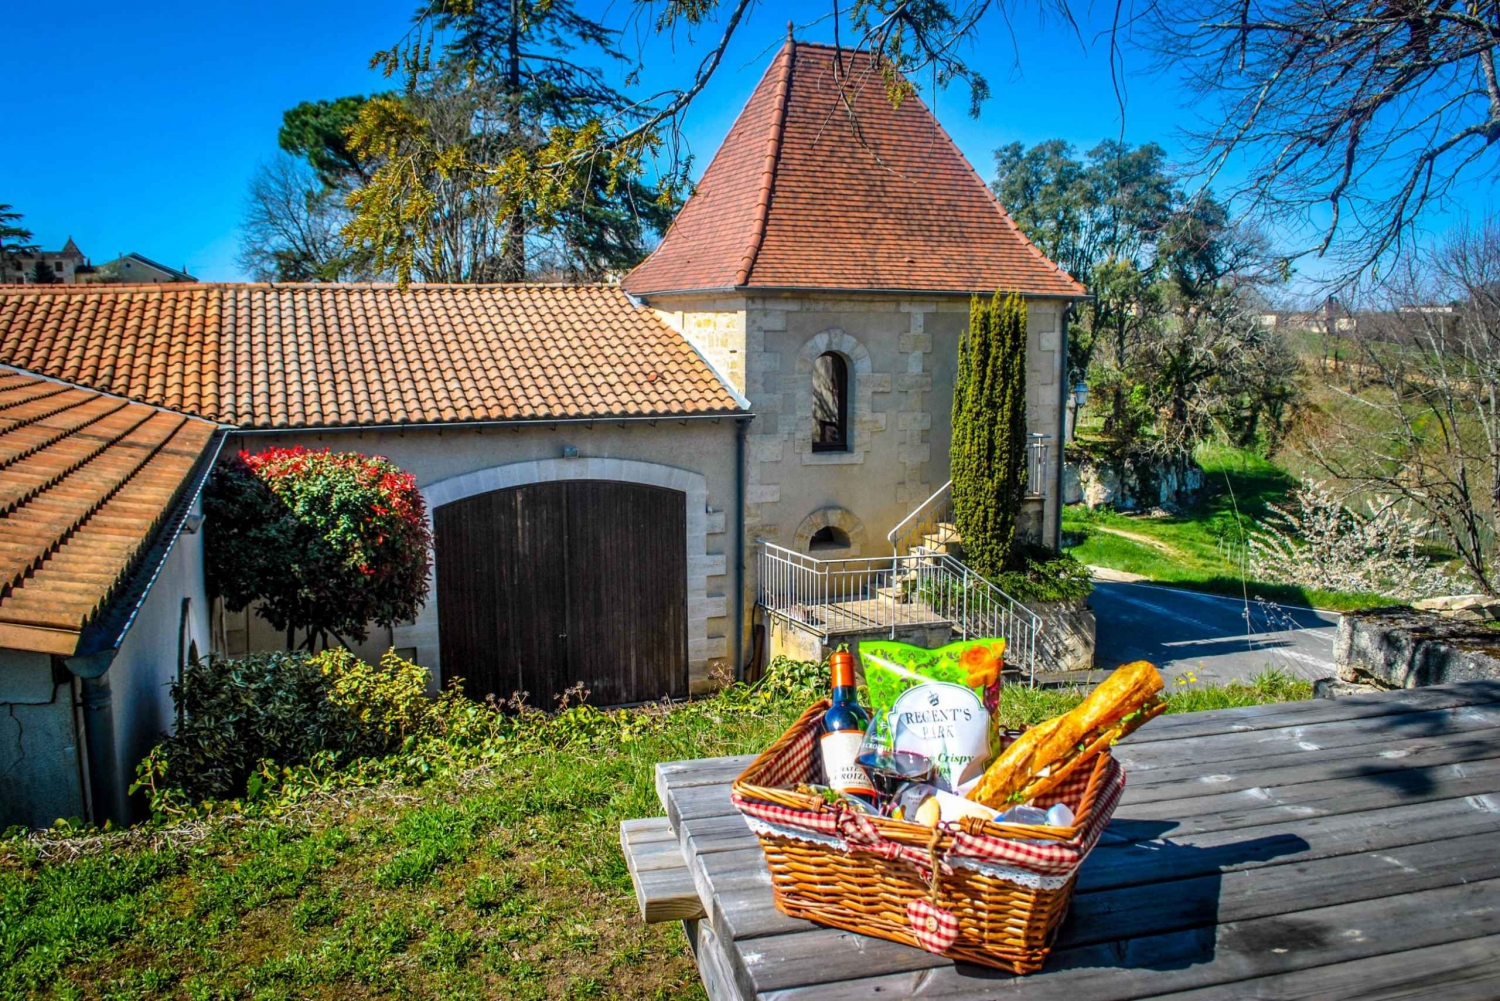 Saint-Emilion: 2 Guided Winery Visits & Picnic Lunch